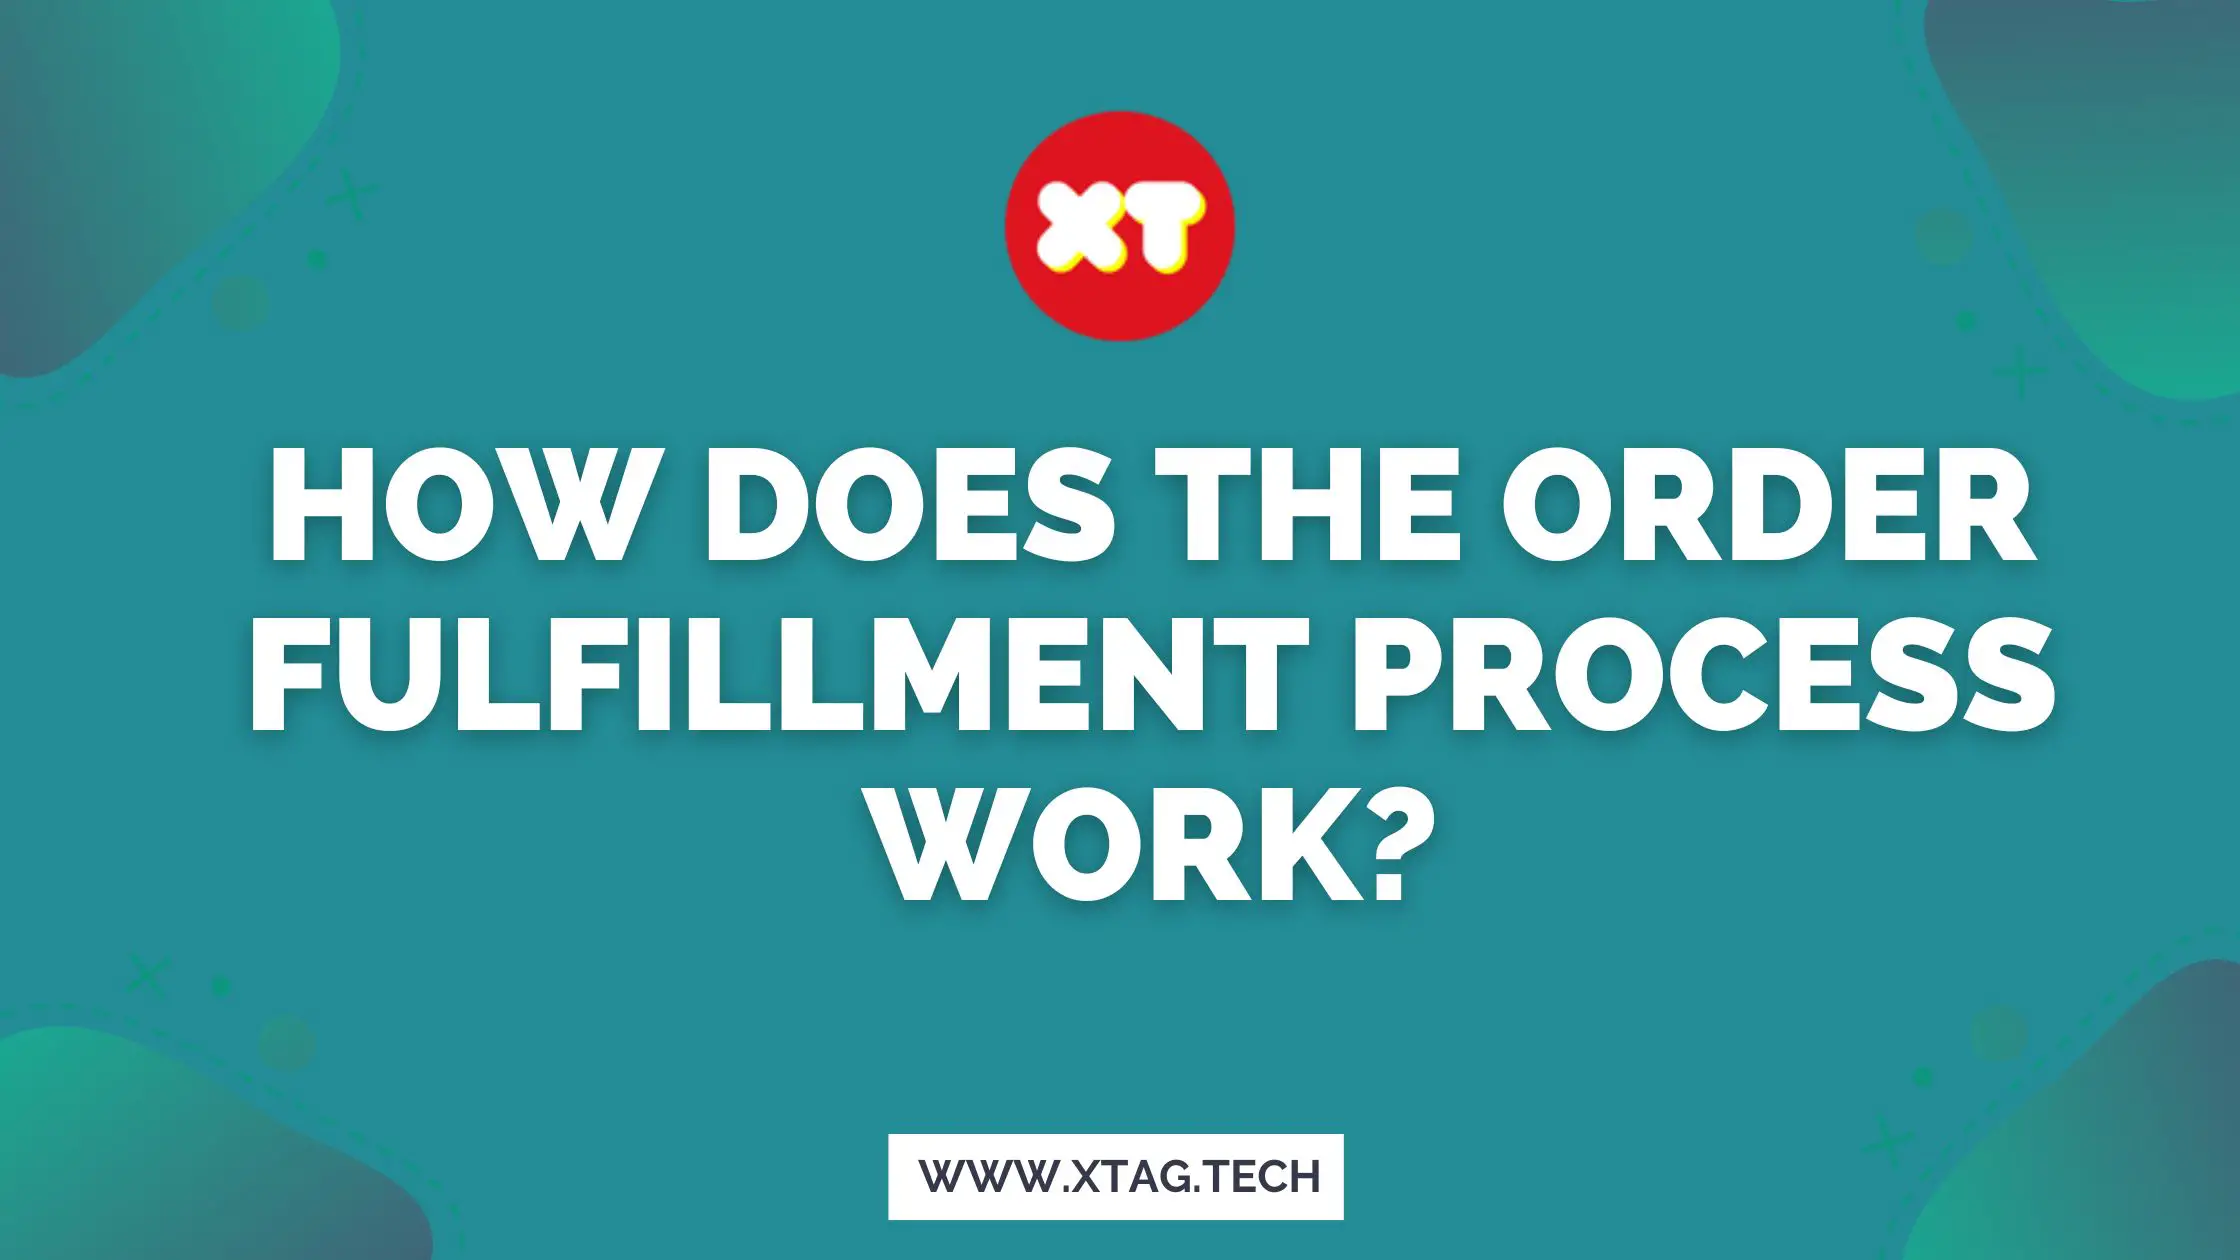 How Does The Order Fulfillment Process Work?